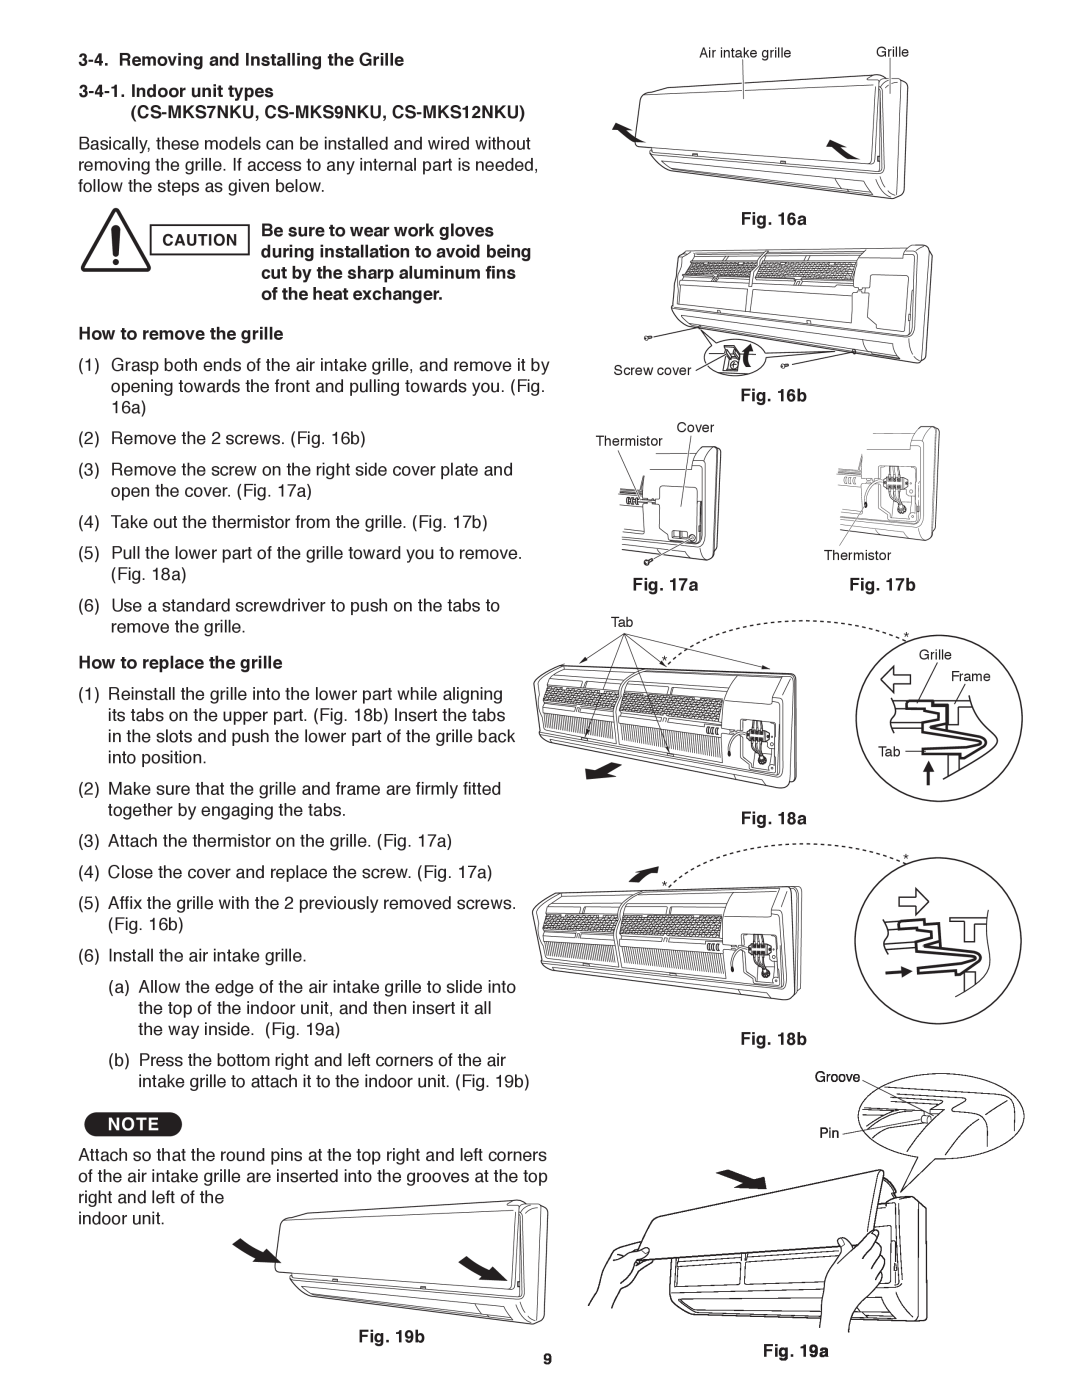 Panasonic CS-MKS24NKU, CS-MKS9NKU, CS-MKS18NKU service manual Removing and Installing the Grille 3-4-1. Indoor unit types 